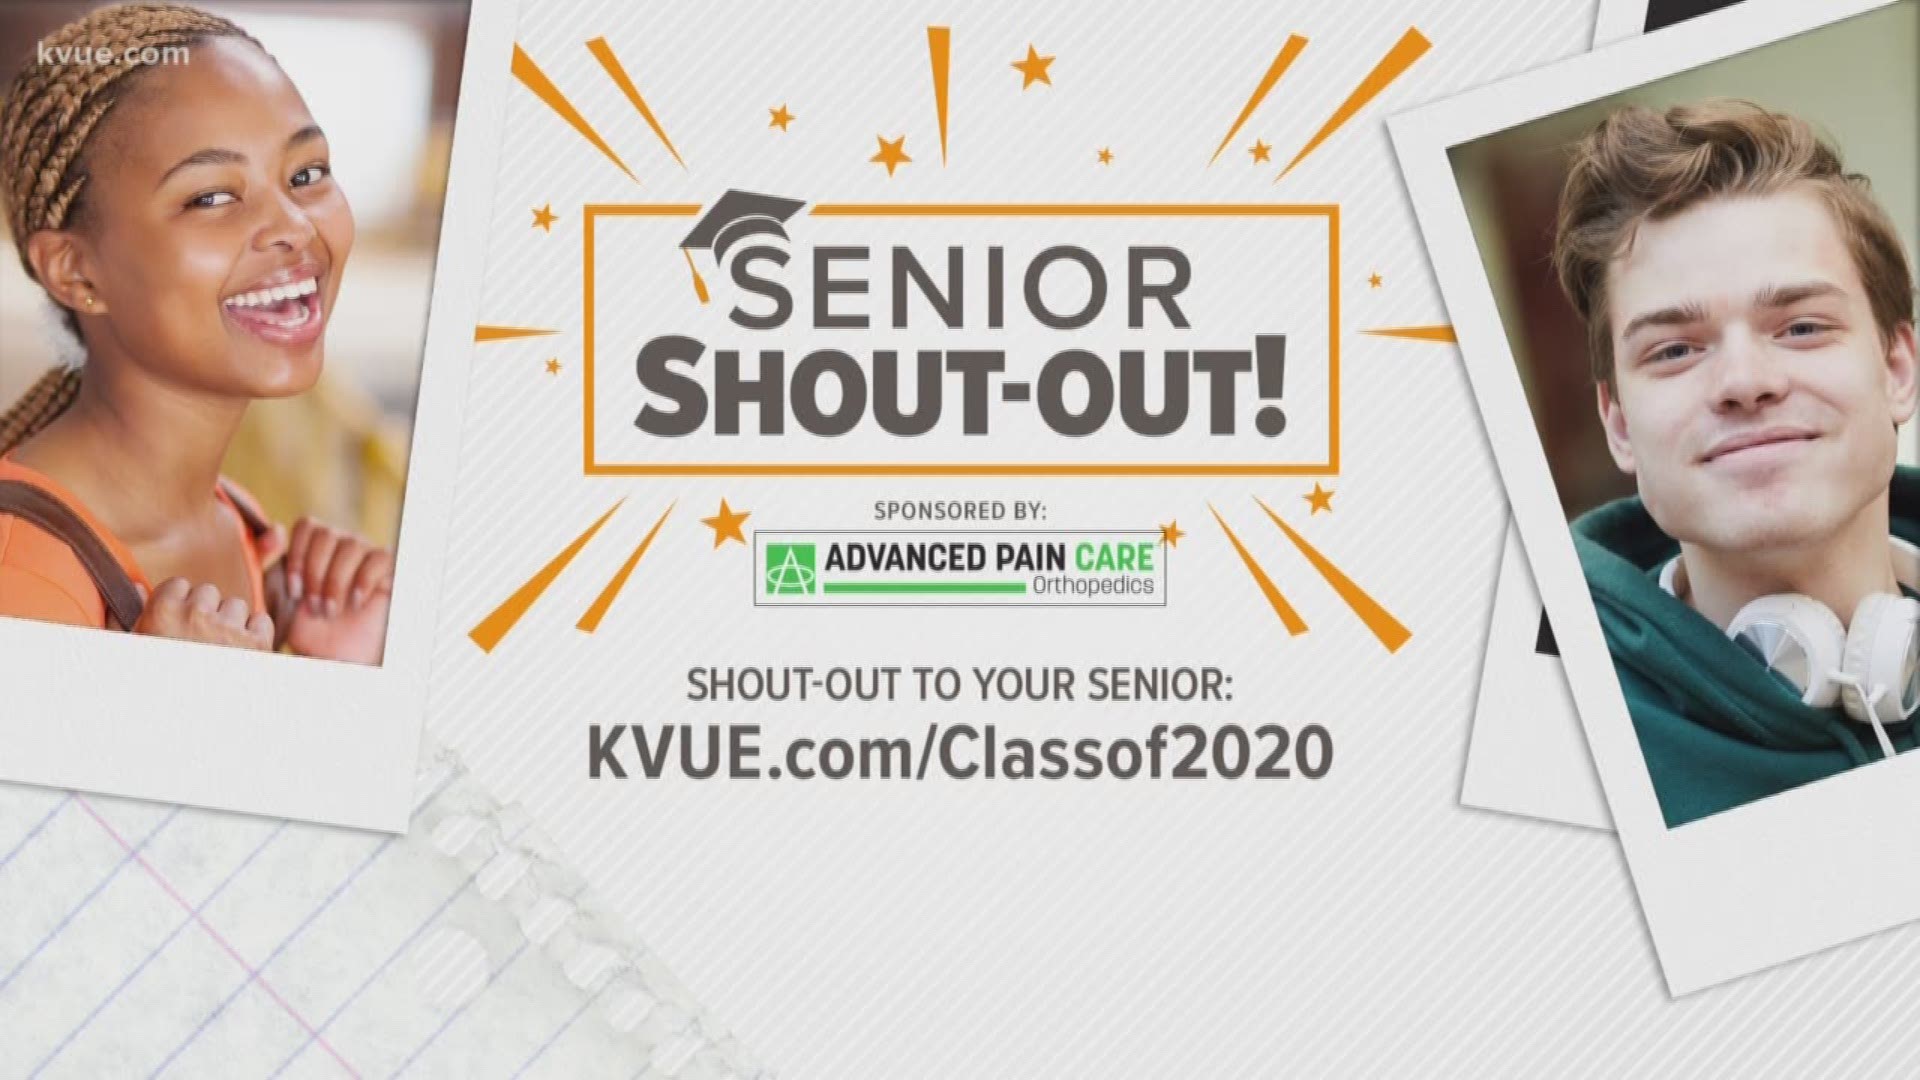 You could see your shout-out on KVUE!